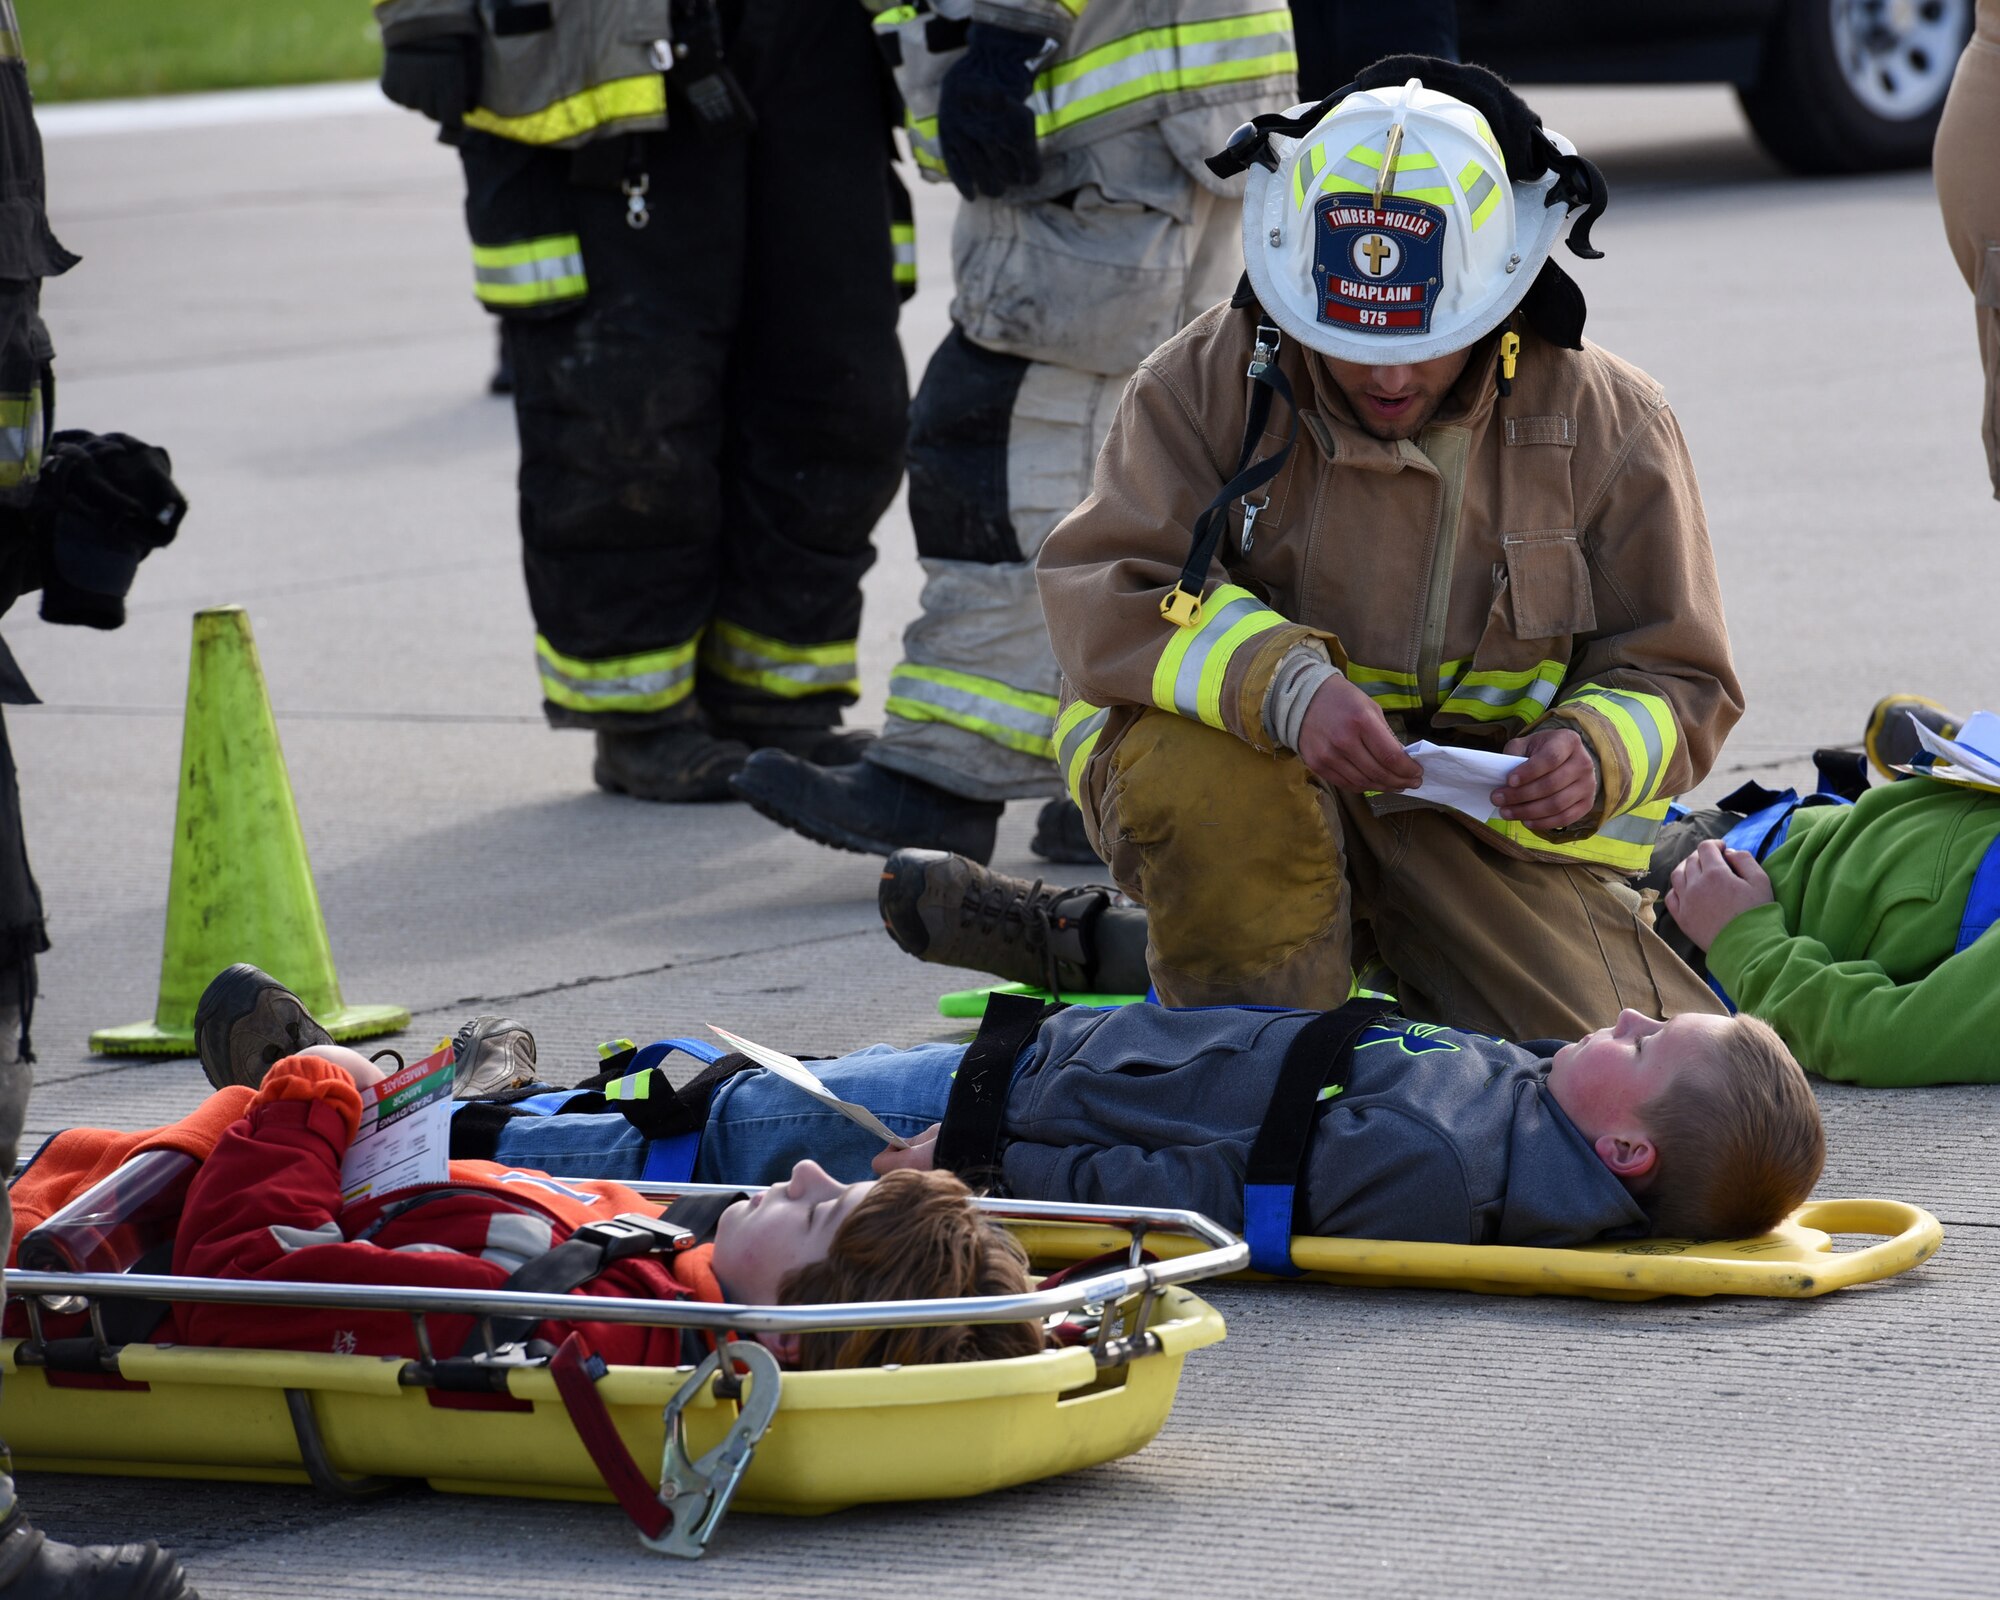 Pastor Ethan Carnes, a firefighter and chaplain with the Timber-Hollis Fire Protection District evaluates the condition of two Boy Scouts who are playing the roles of victims of an aircraft crash at the General Wayne A. Downing Peoria International Airport in Peoria, Ill. April 22, 2017. Thirty-eight agencies and more than 200 exercise participants took part in the full-scale mass casualty exercise. (U.S. Air National Guard photo by Master Sgt. Todd Pendleton)